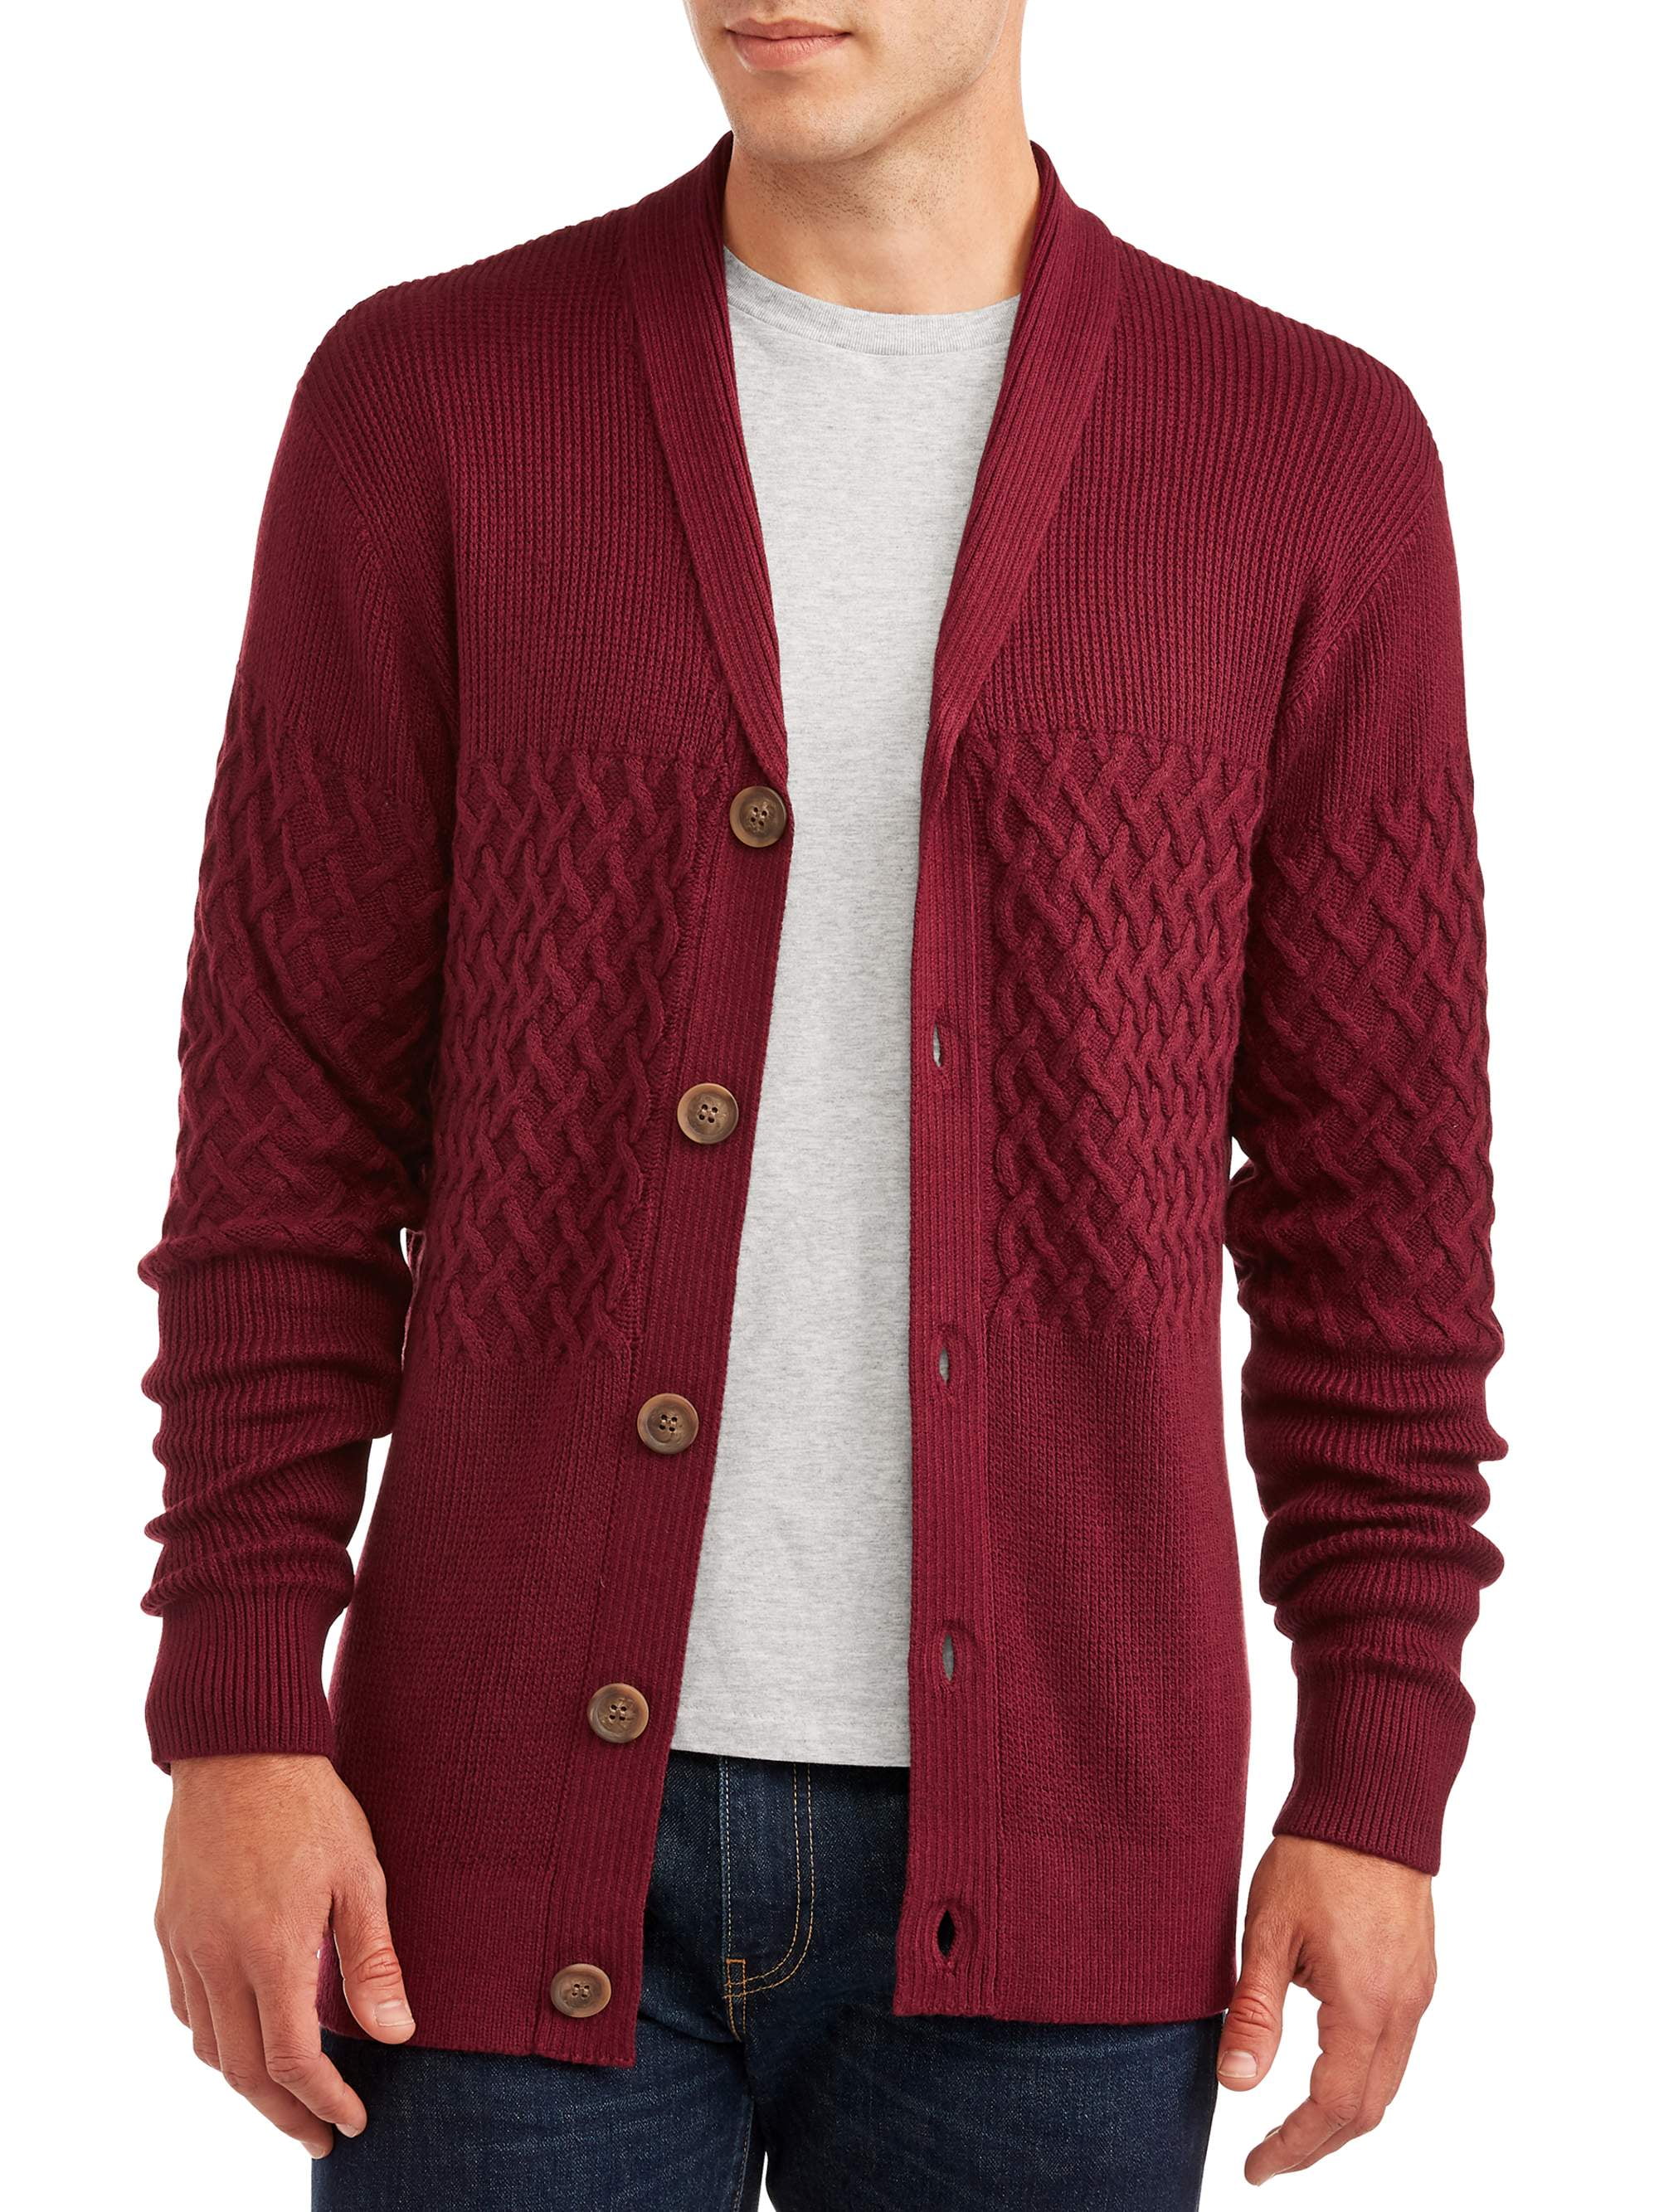 GEORGE - George Men's and Big Men's Cardigan Knit Sweater, up to Size ...